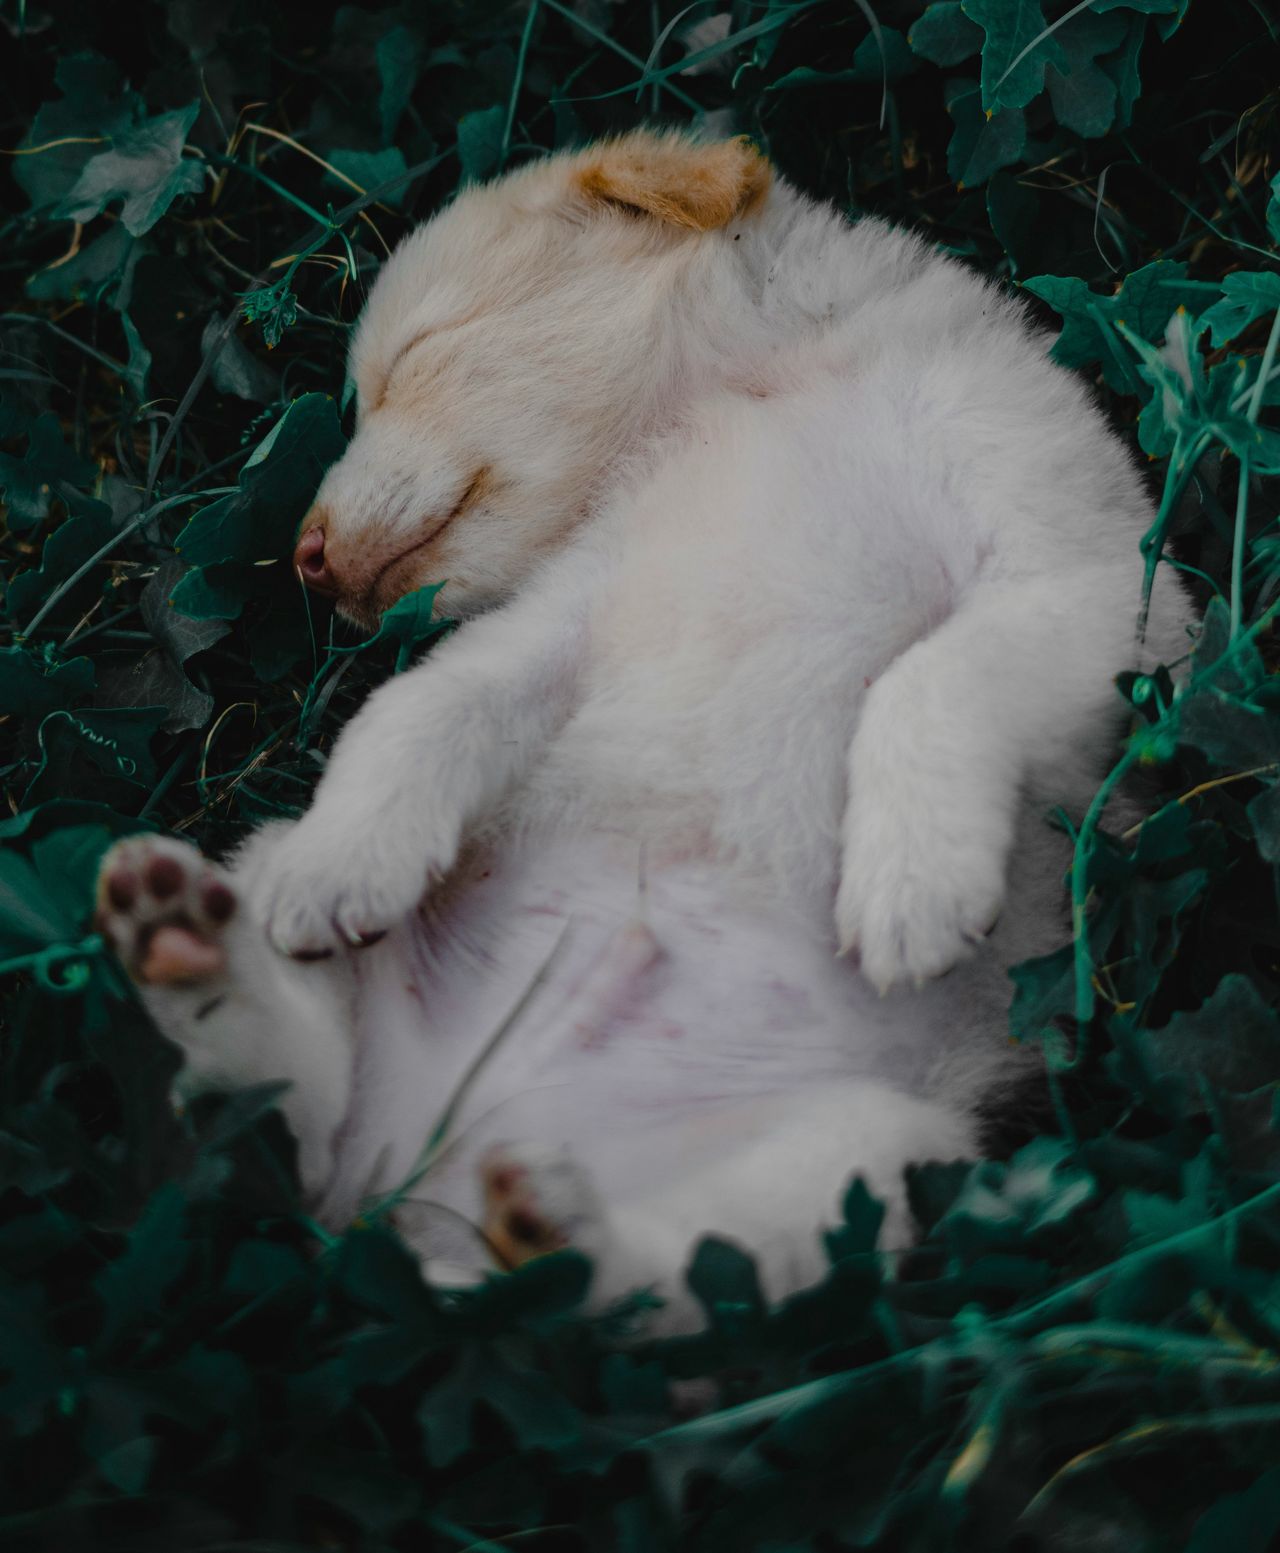 Puppies can fall asleep in the strangest positions.